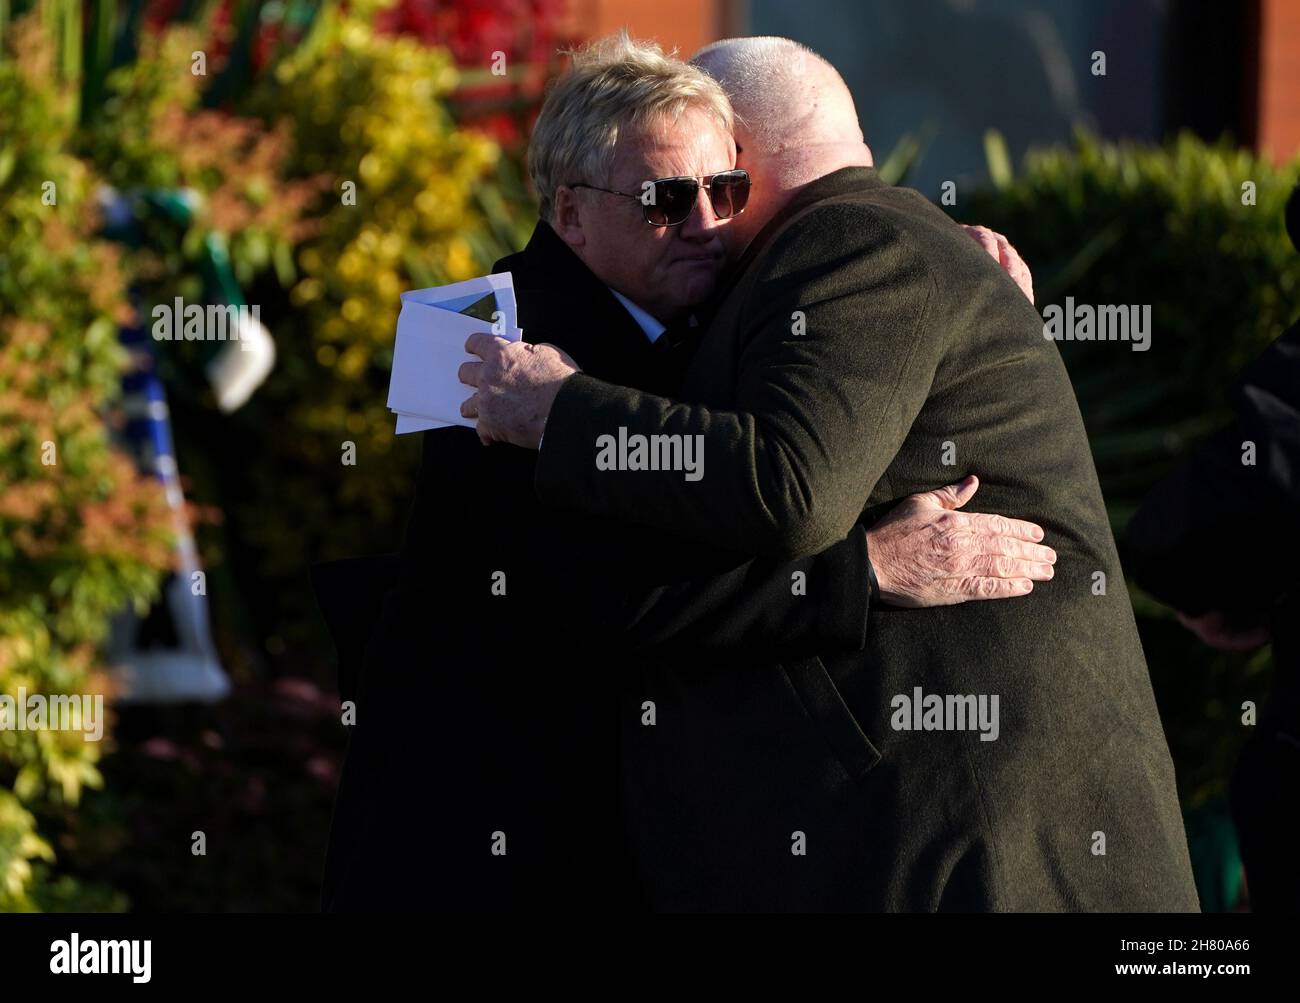 Frank McAvennie (left) ahead of  the funeral service of former Celtic player Bertie Auld. Auld, one of Celtic's European Cup heroes, died at the age of 83 on November 14, 2021. The midfielder scored 85 goals in 283 appearances over two spells for Celtic, the most famous game of which was the 1967 European Cup final win against Inter Milan in Lisbon. Picture date: Friday November 26, 2021. See PA story SOCCER Auld. Photo credit should read: Andrew Milligan/PA Wire. RESTRICTIONS: Use subject to restrictions. Editorial use only, no commercial use without prior consent from rights holder. Stock Photo